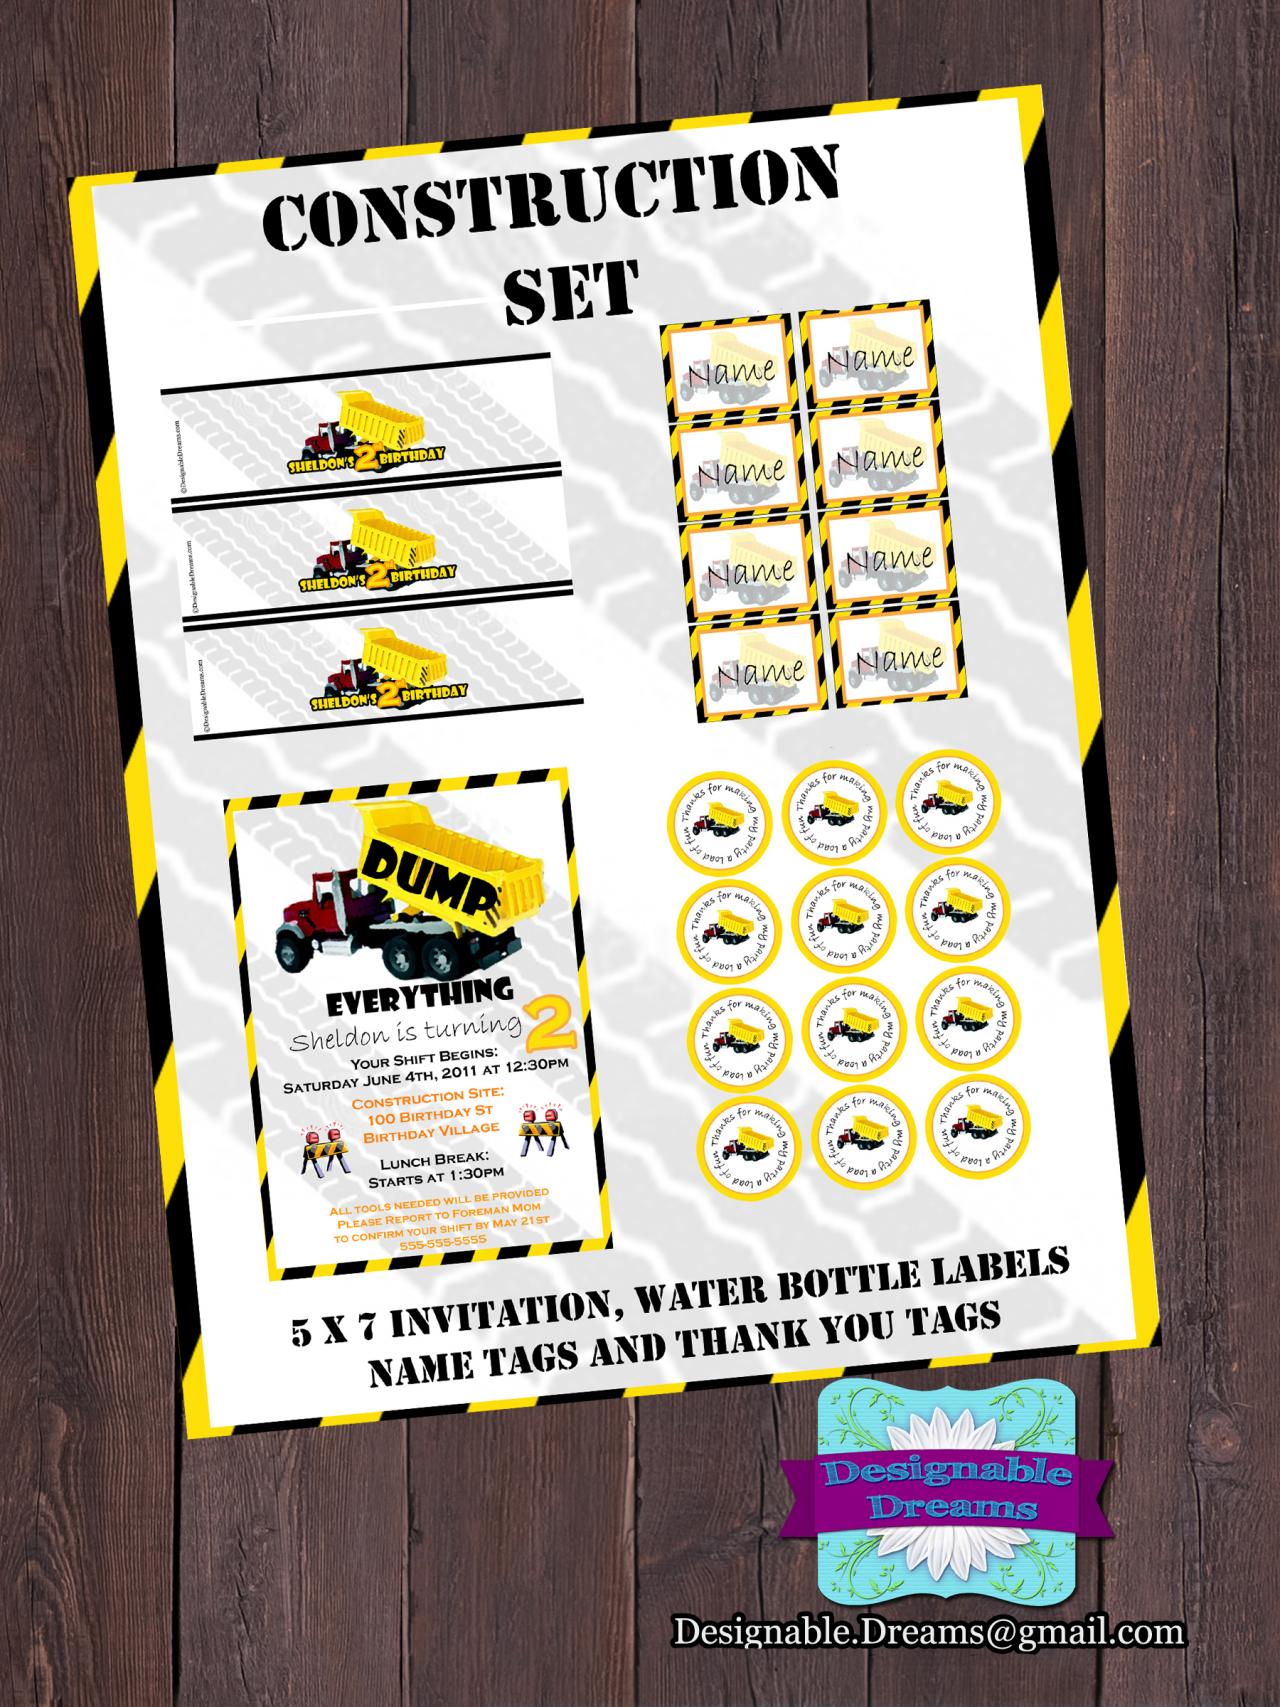 Construction Invitation & Party Package